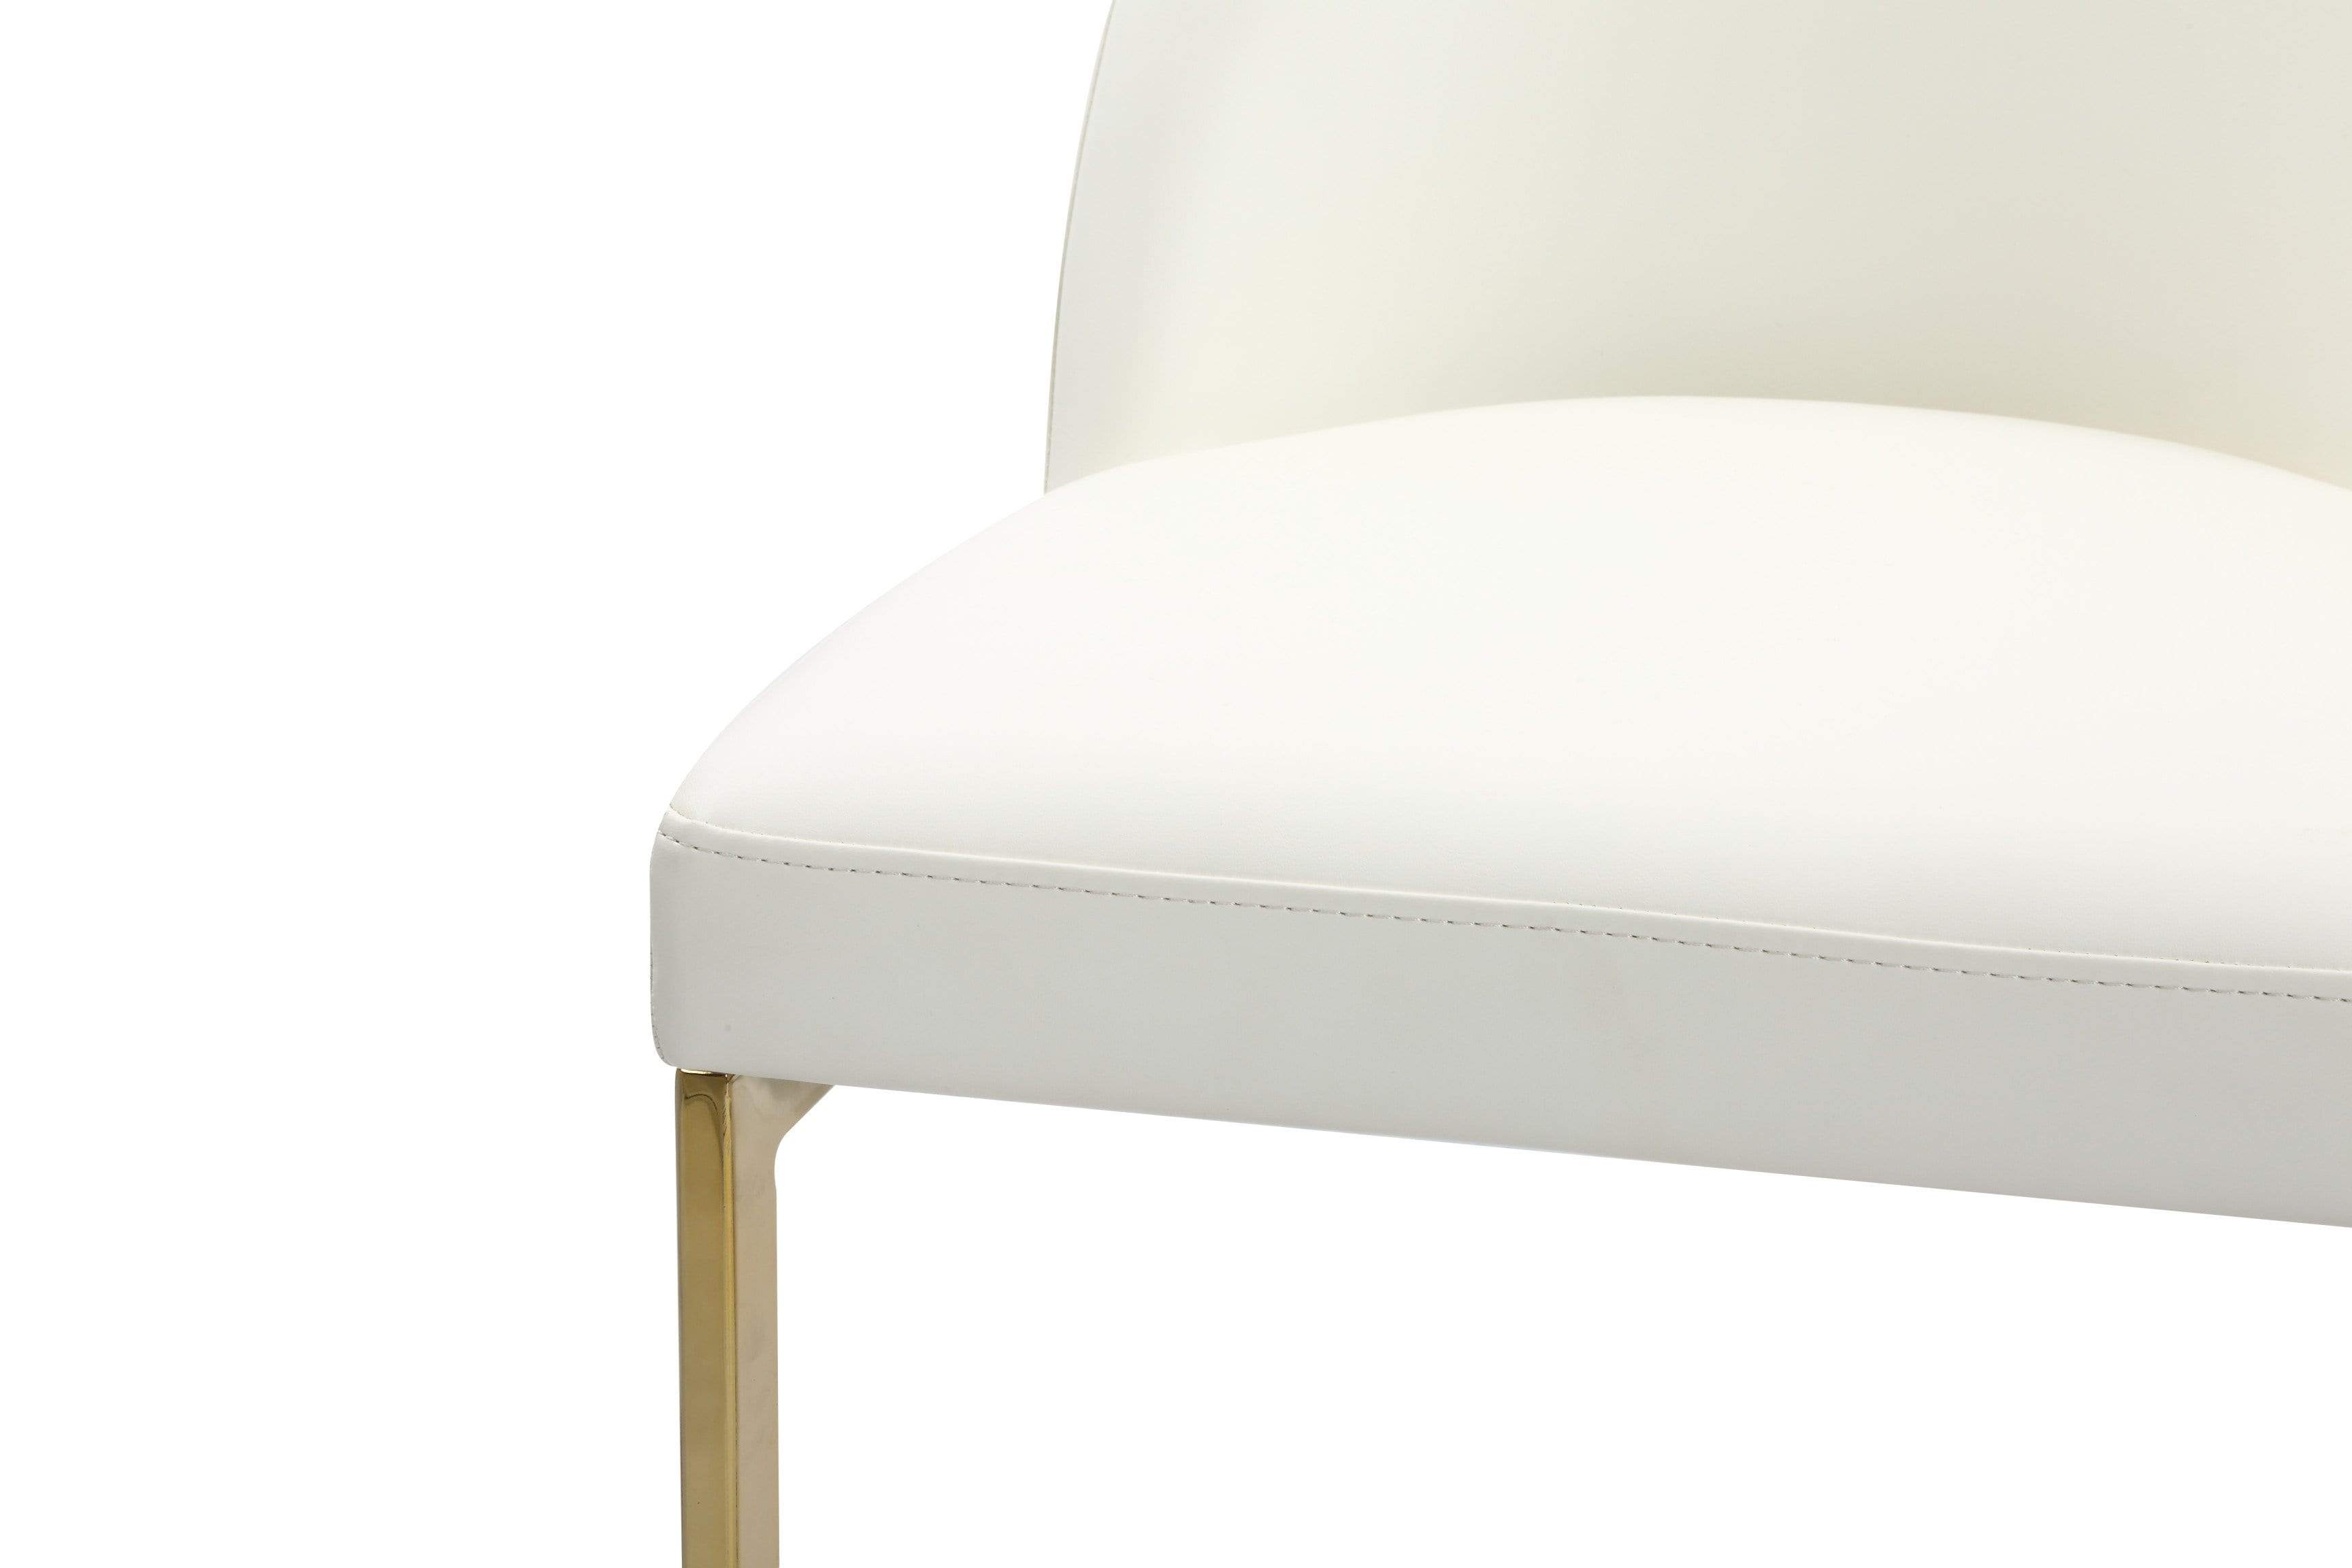 Airlie Faux Leather Counter Stool Chair Gold Base